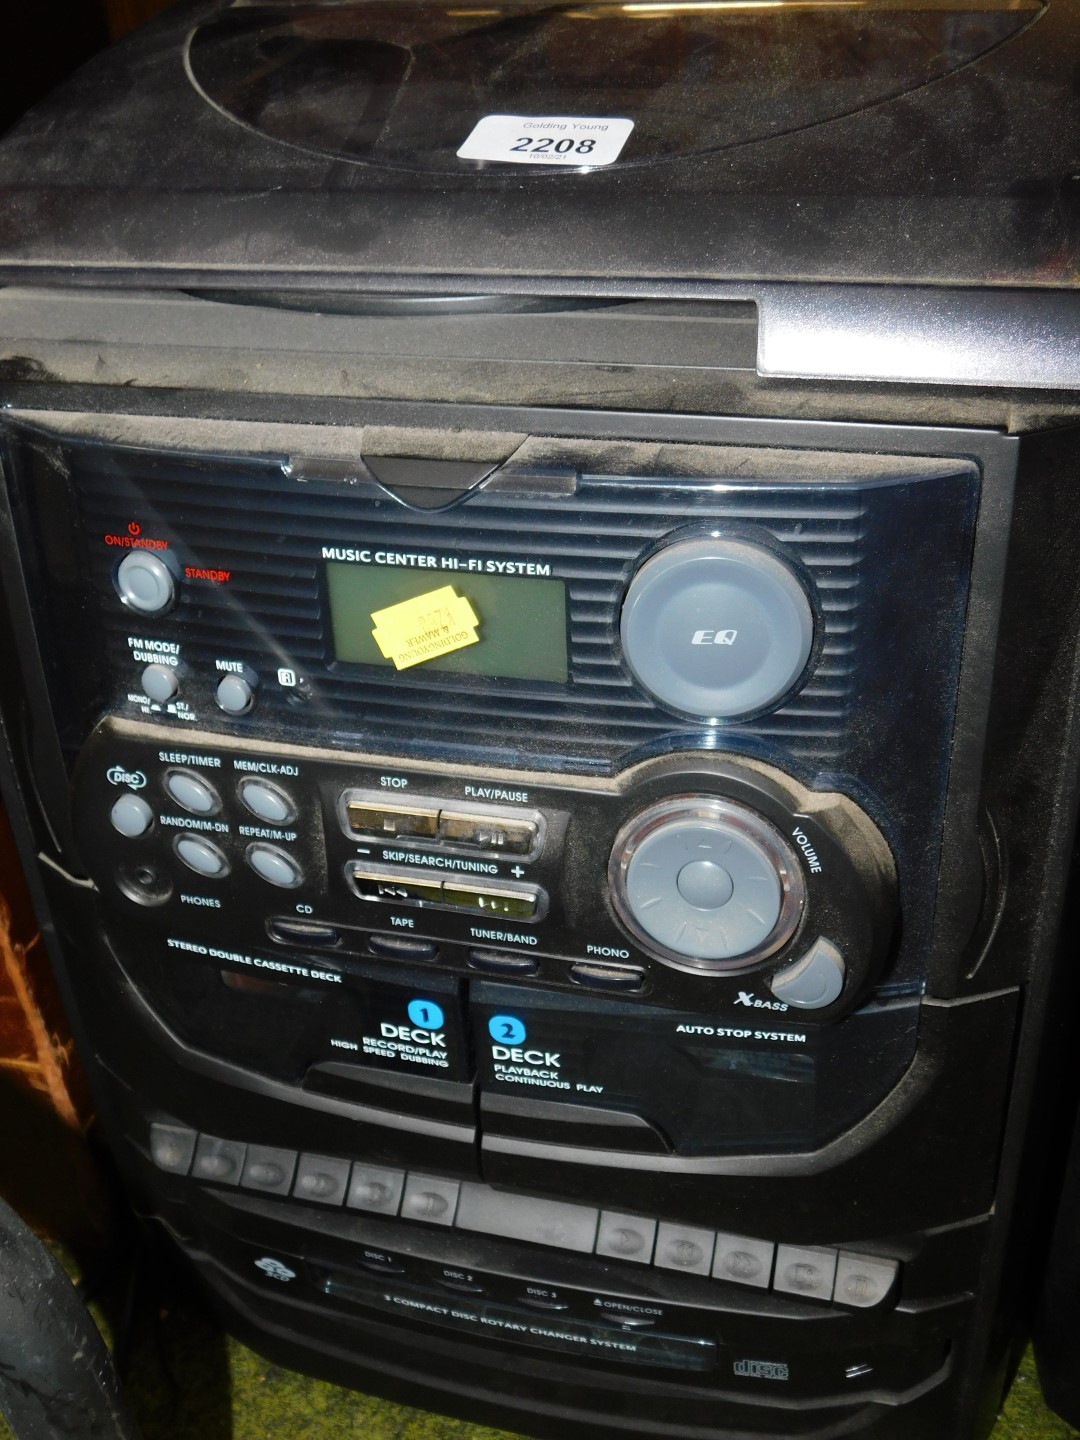 A Music Centre hi-fi system, and a Kodak colour printer with ink and various gloss photograph paper. - Image 2 of 3